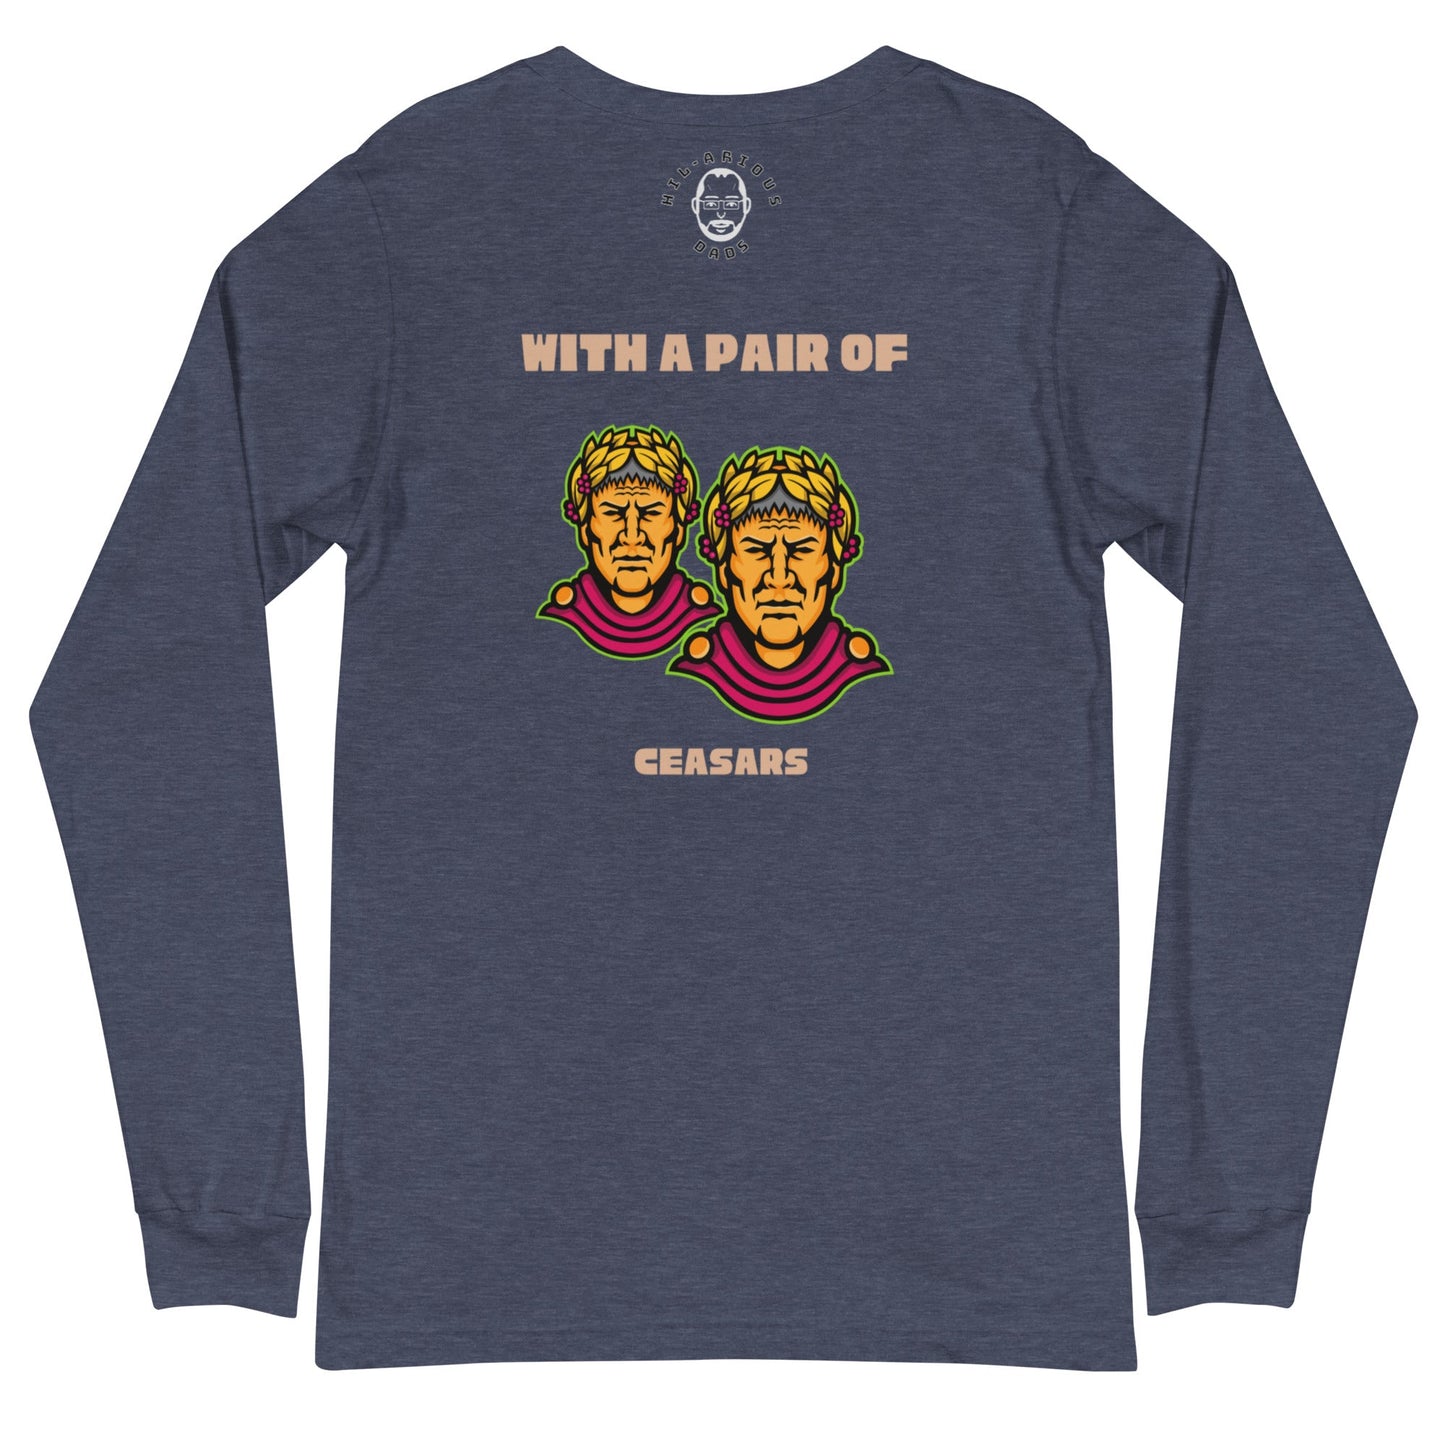 How was Rome split in two?-Long Sleeve Tee - Hil-arious Dads